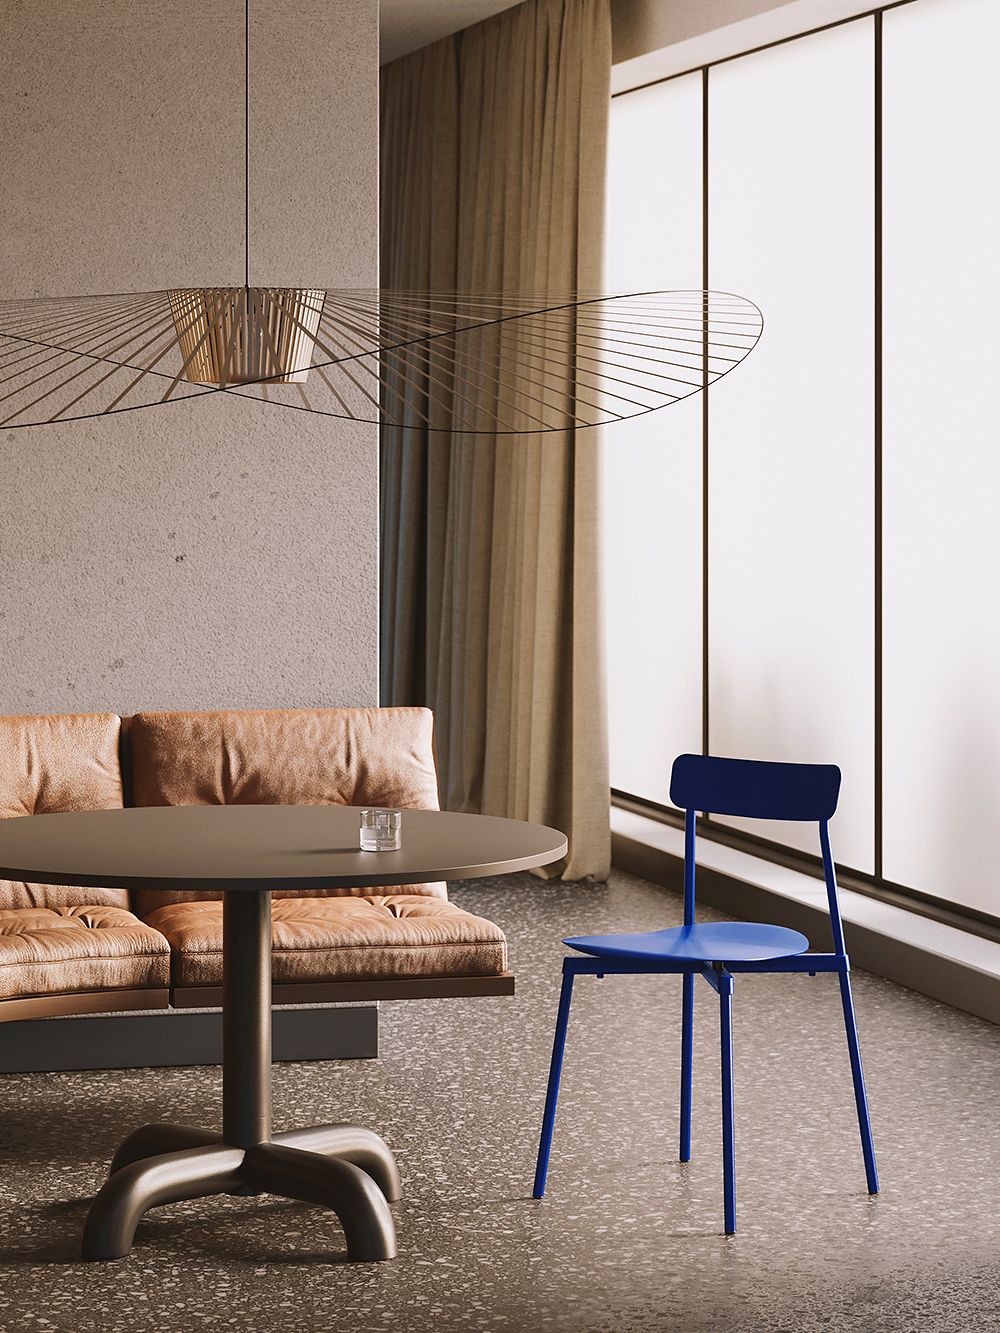 An image of Petite Friture's blue Fromme chair at the table. Also shown is a Vertigo pendant light. 